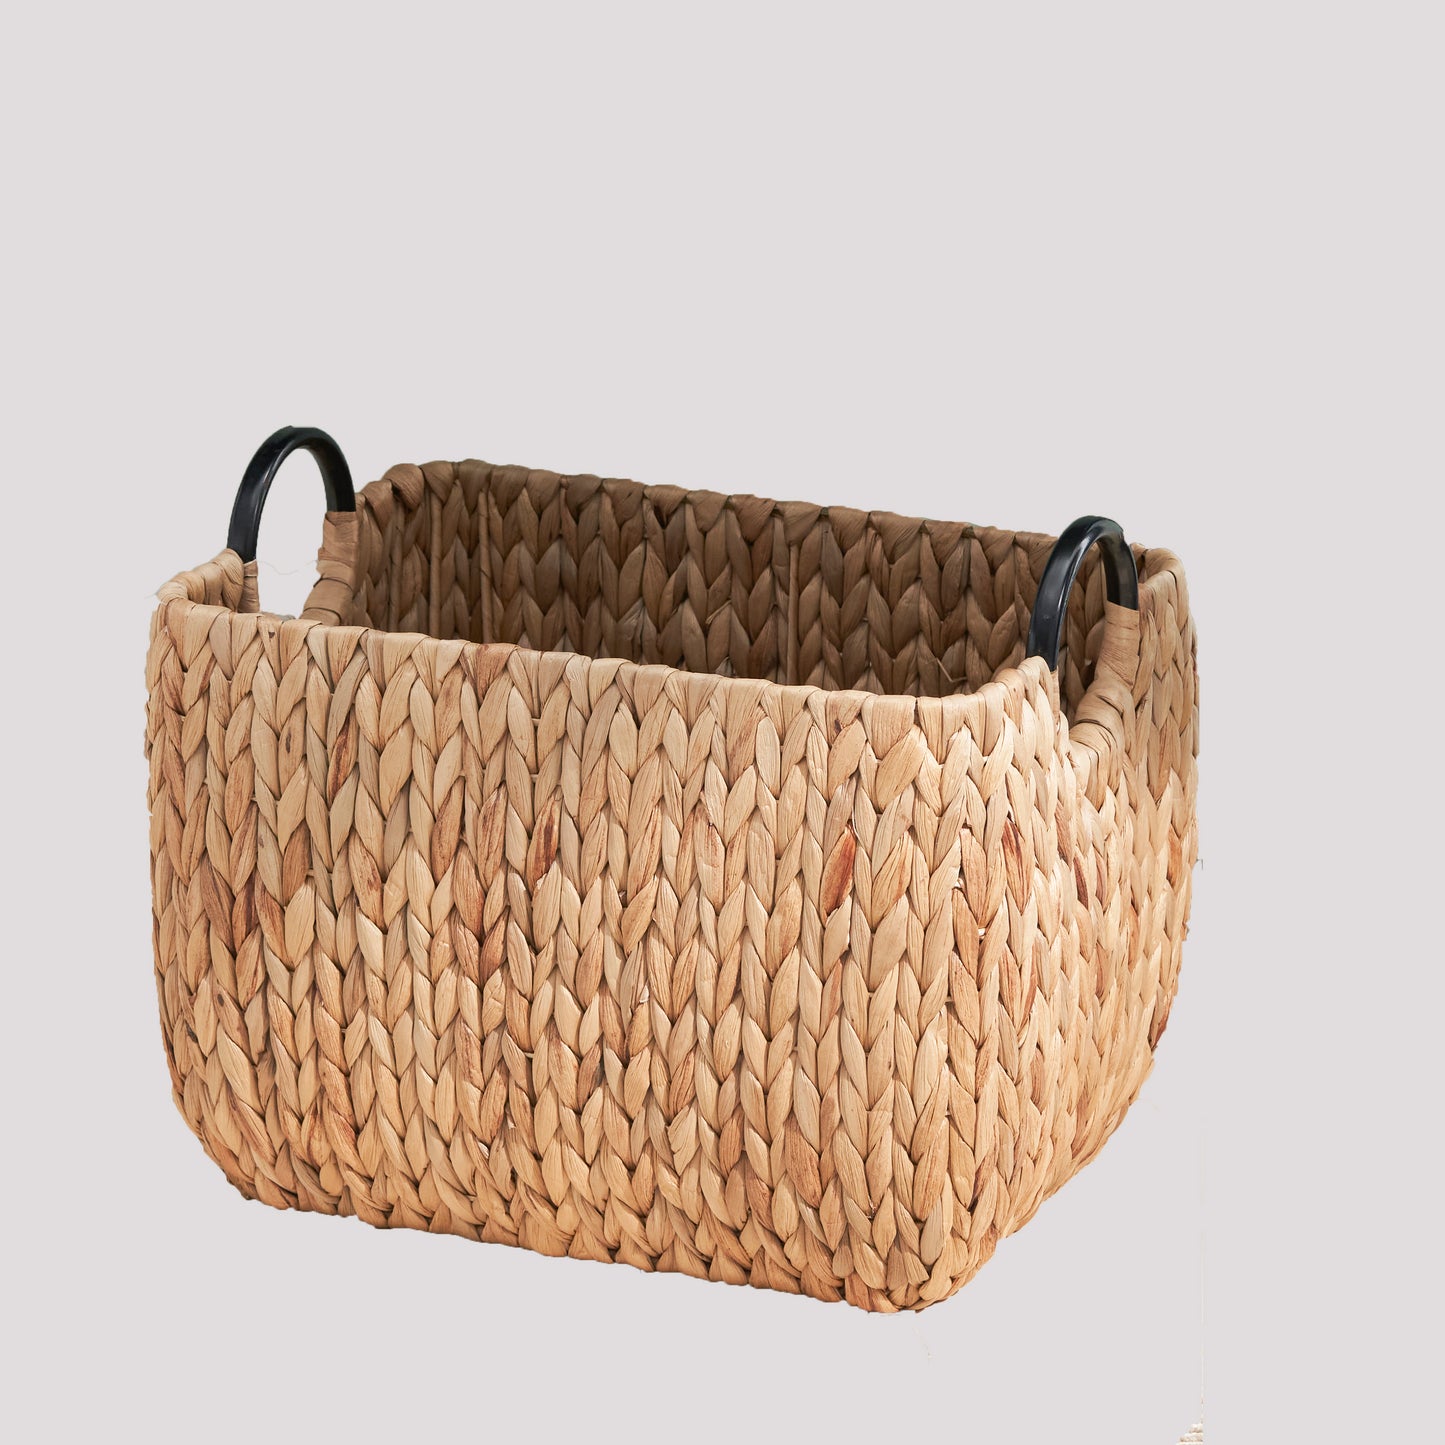 Woven Wicker Storage Baskets with Handles - Ukerr Home